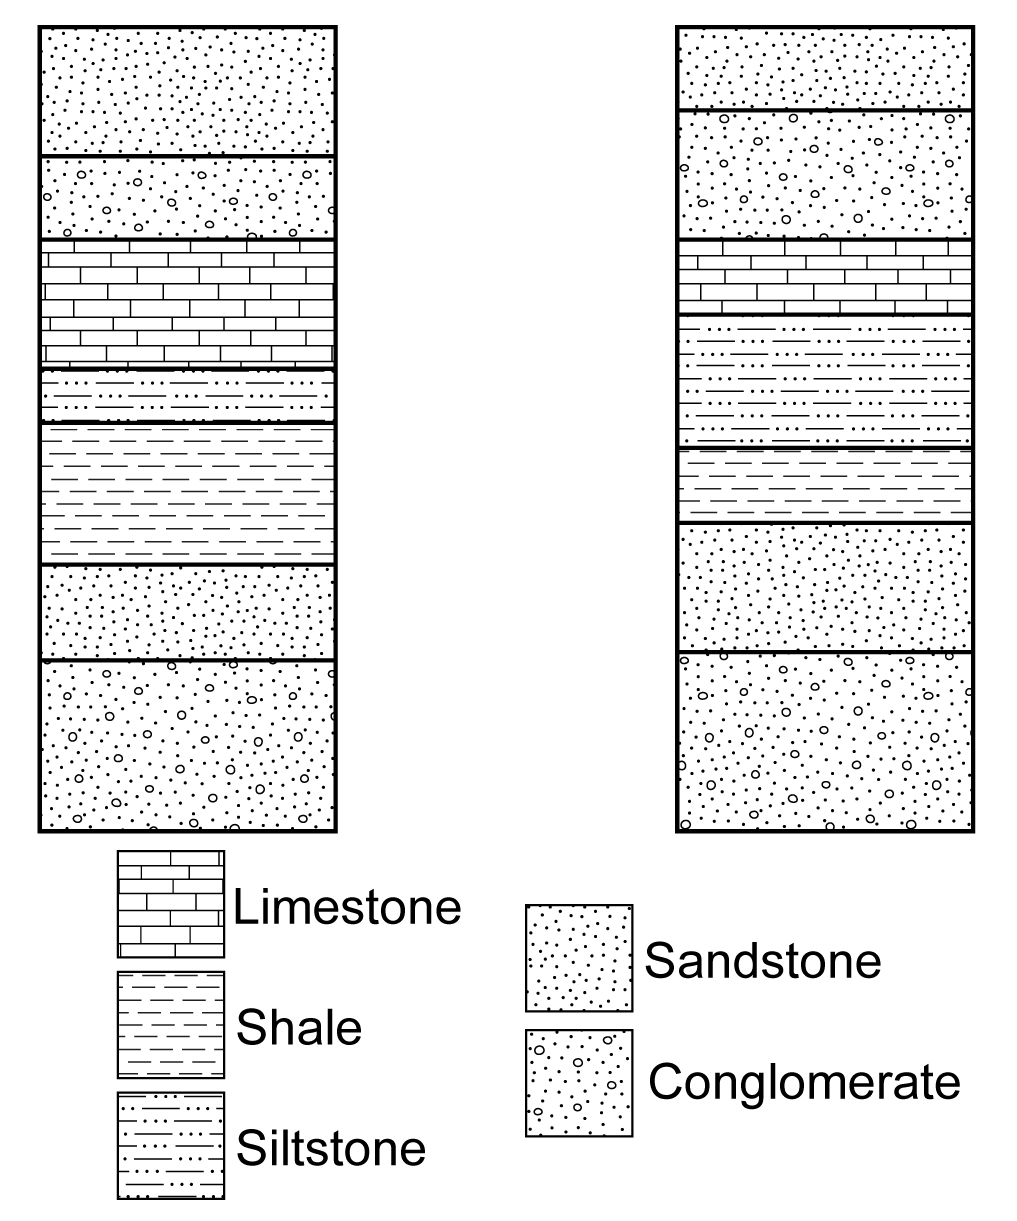 Two stratigraphic columns to be used for exercise 3.5a and symbol key.